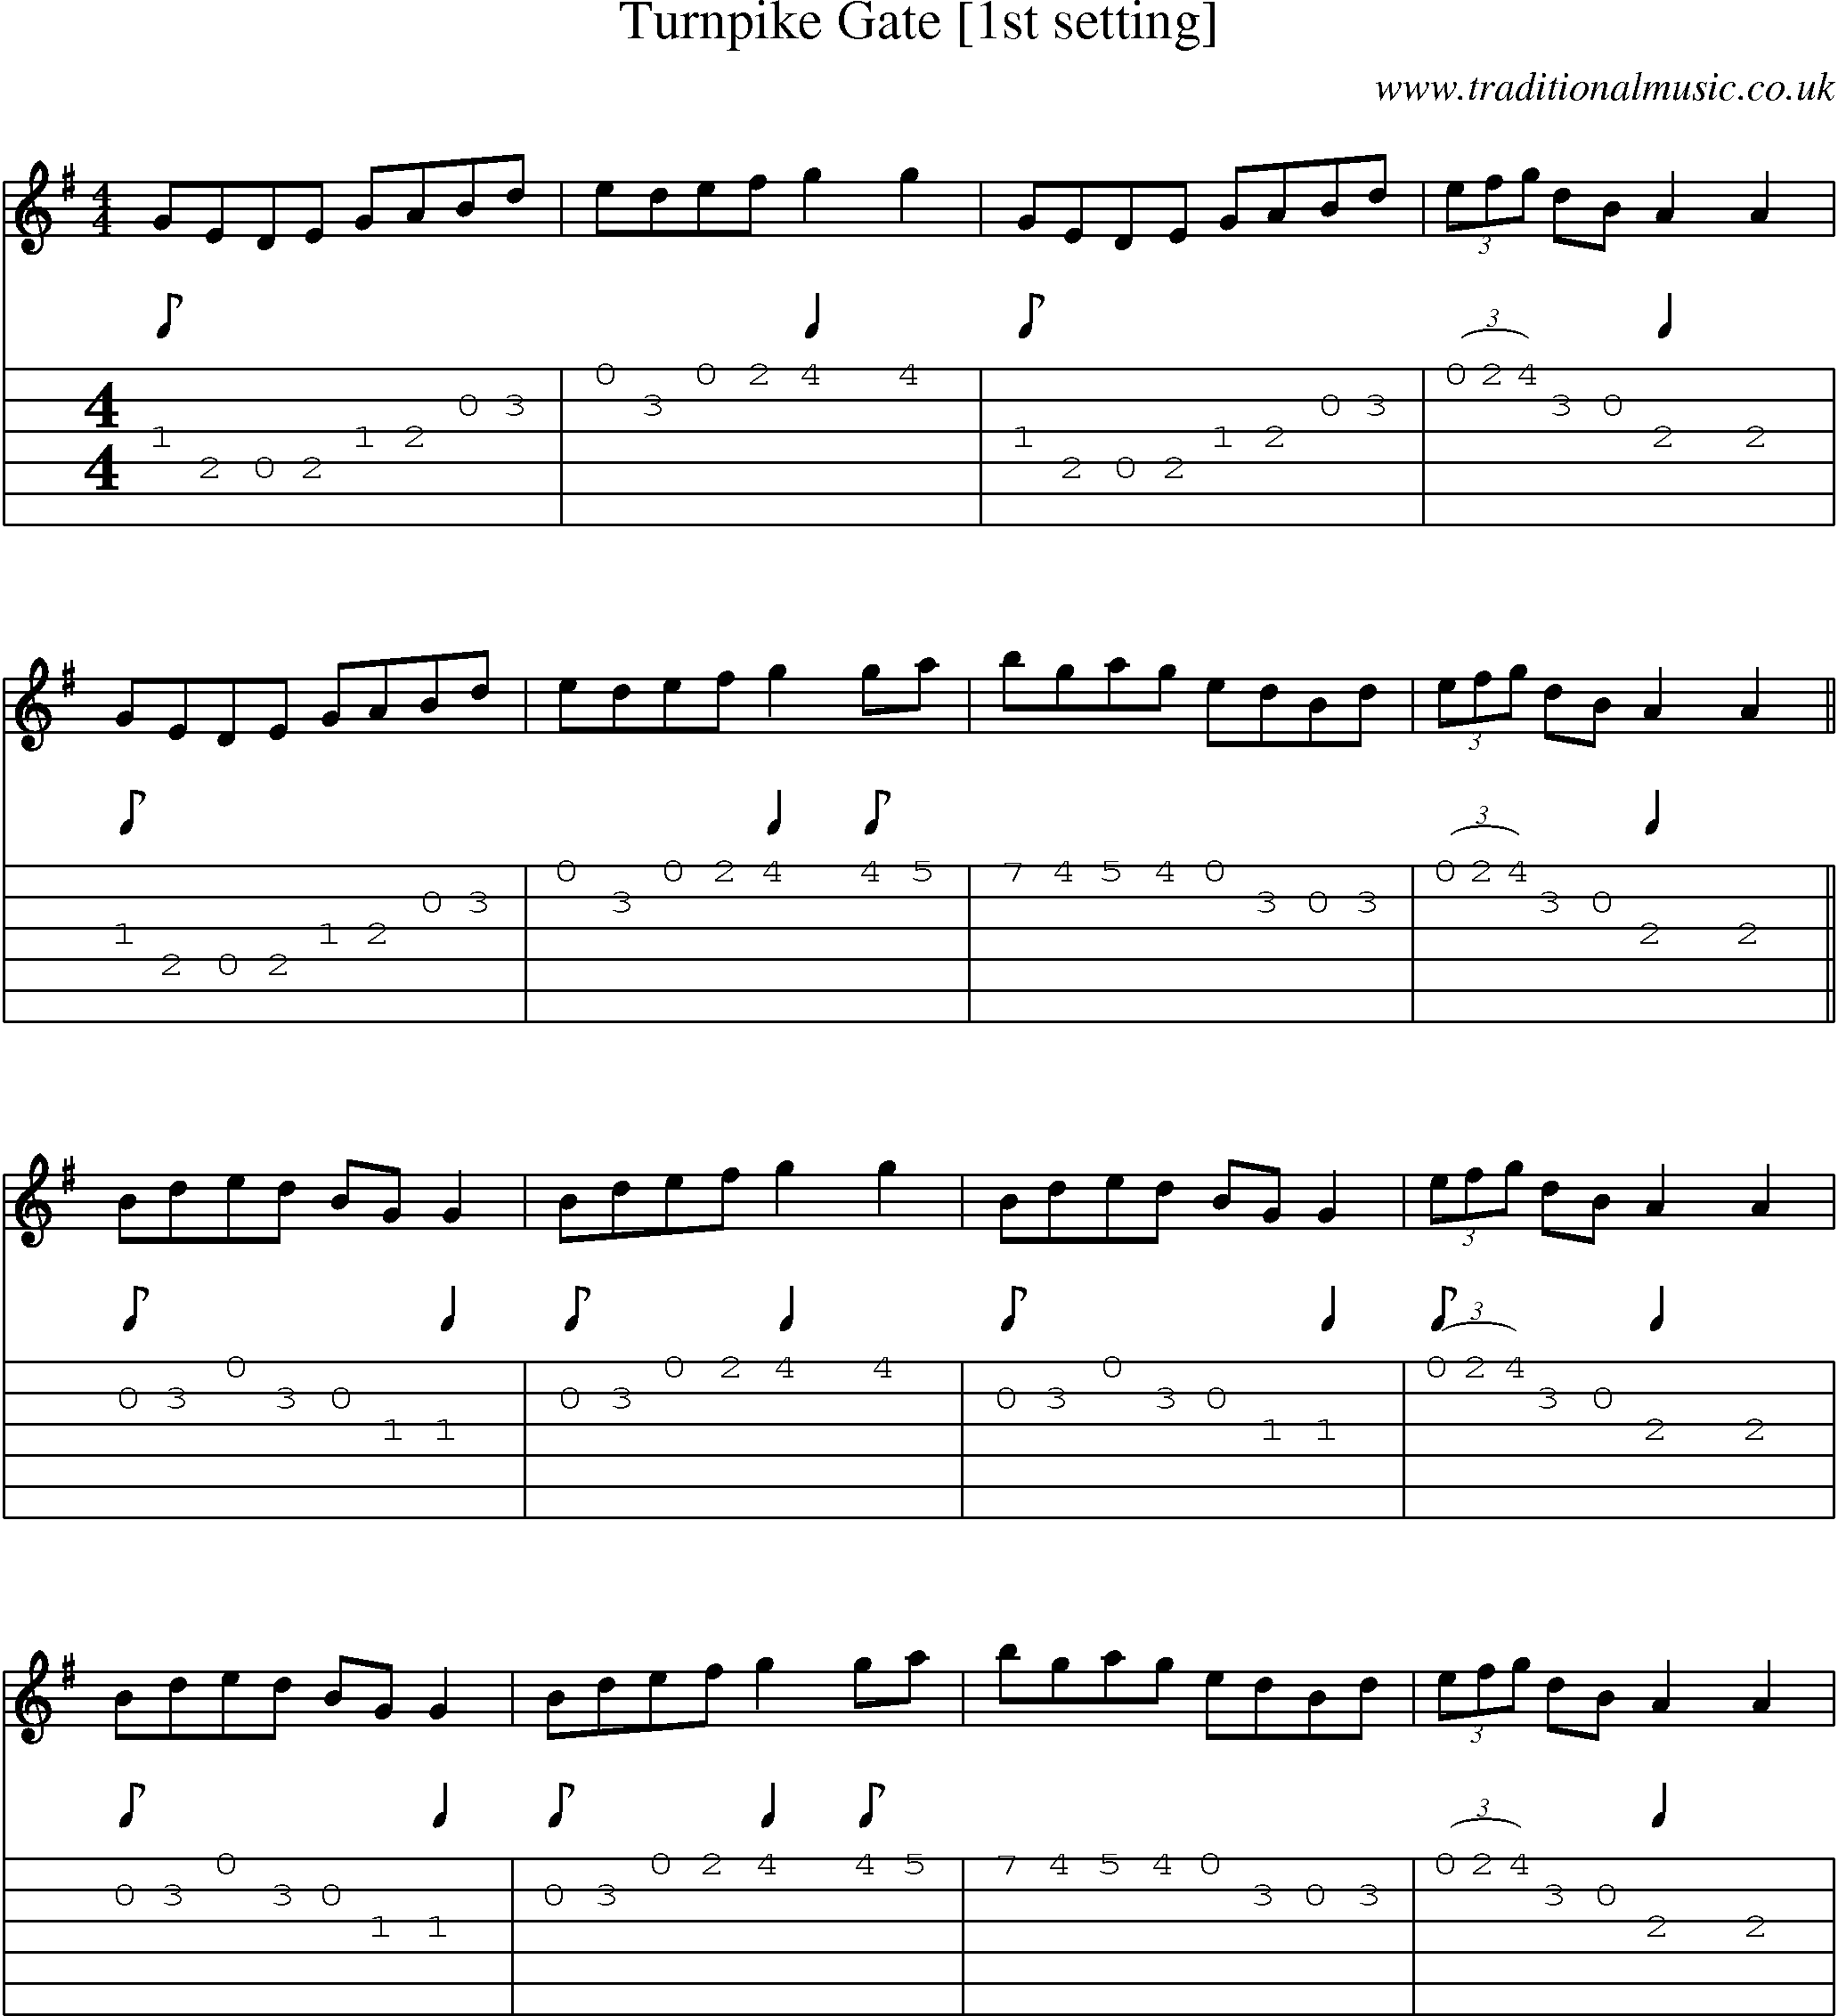 Music Score and Guitar Tabs for Turnpike Gate [1st Setting]